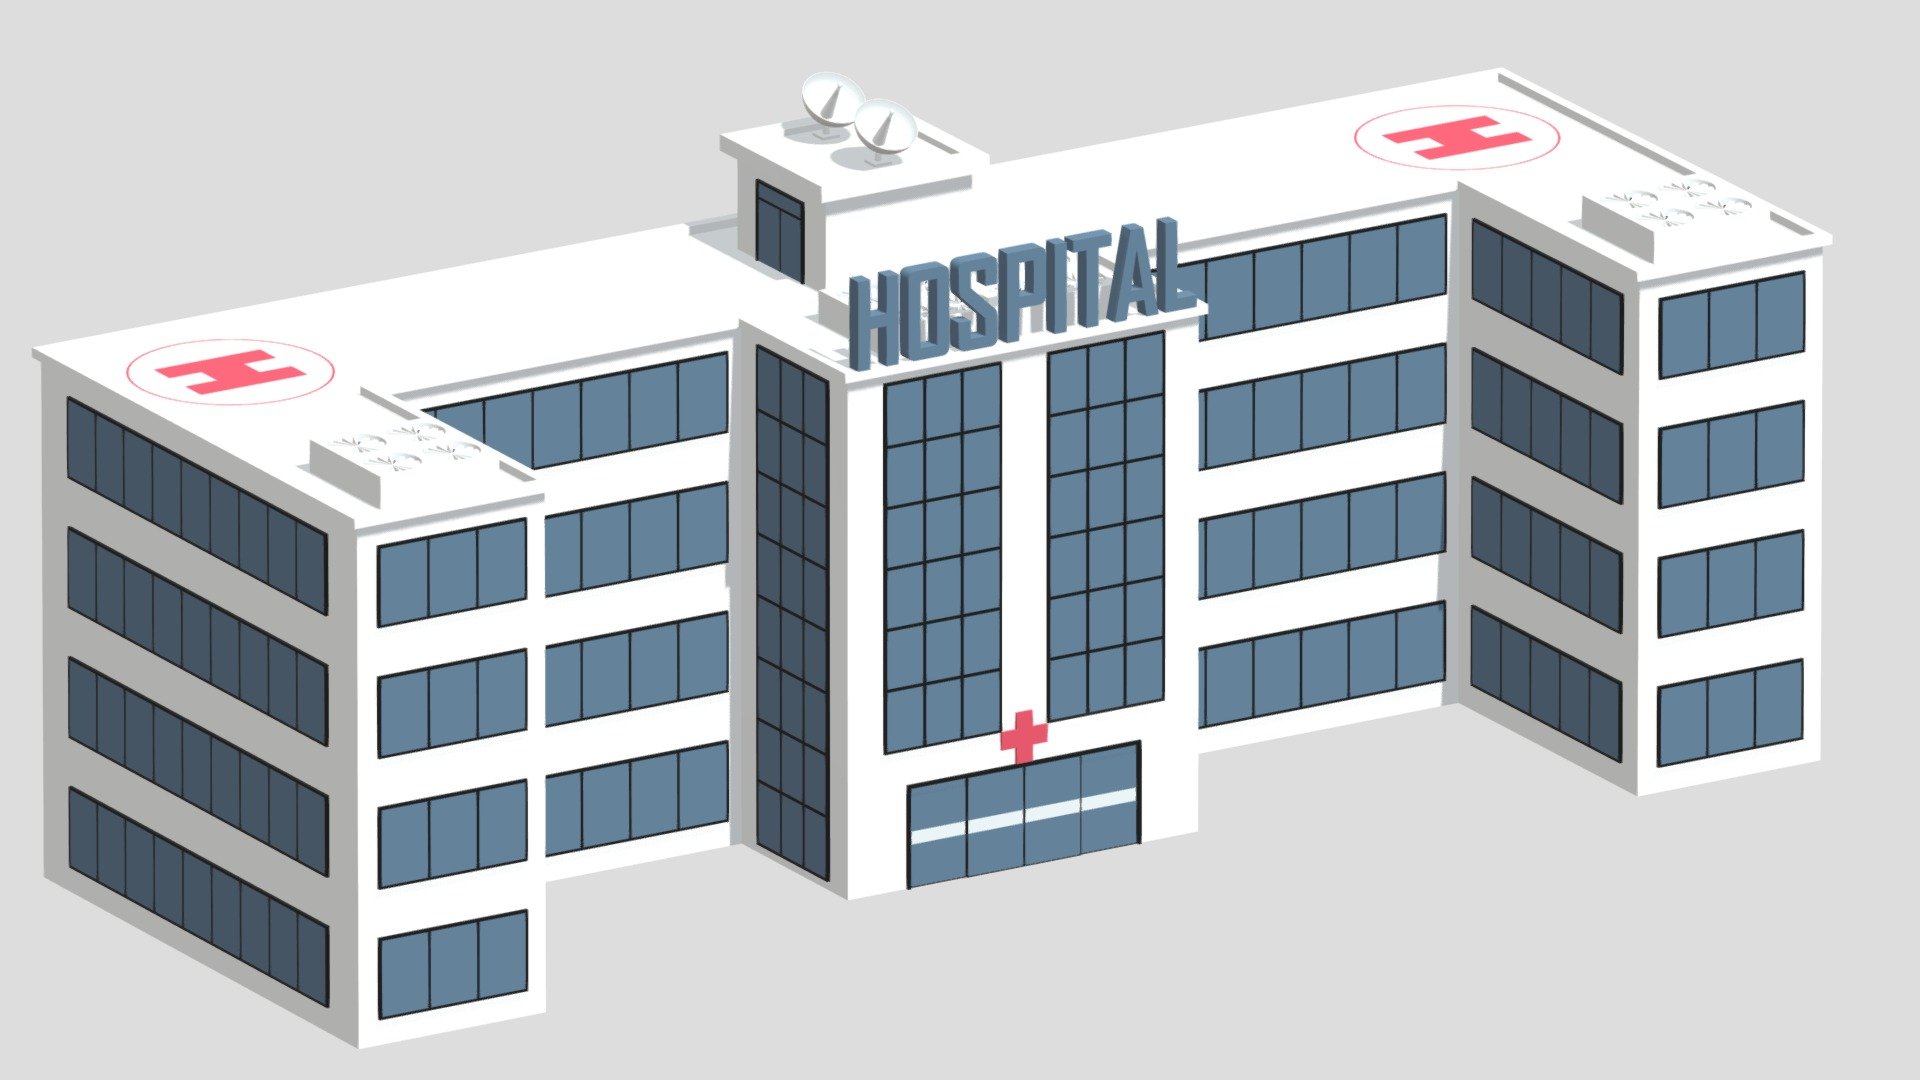 -Caortoon Hospital Building.

-This product contains 23 models.

-This product was created in Blender 2.8.

-Total vertices: 7,226. Total polygons: 6,200;

-Formats: . blend . fbx . obj, c4d,dae,fbx,unity.

-Thank you 3d model